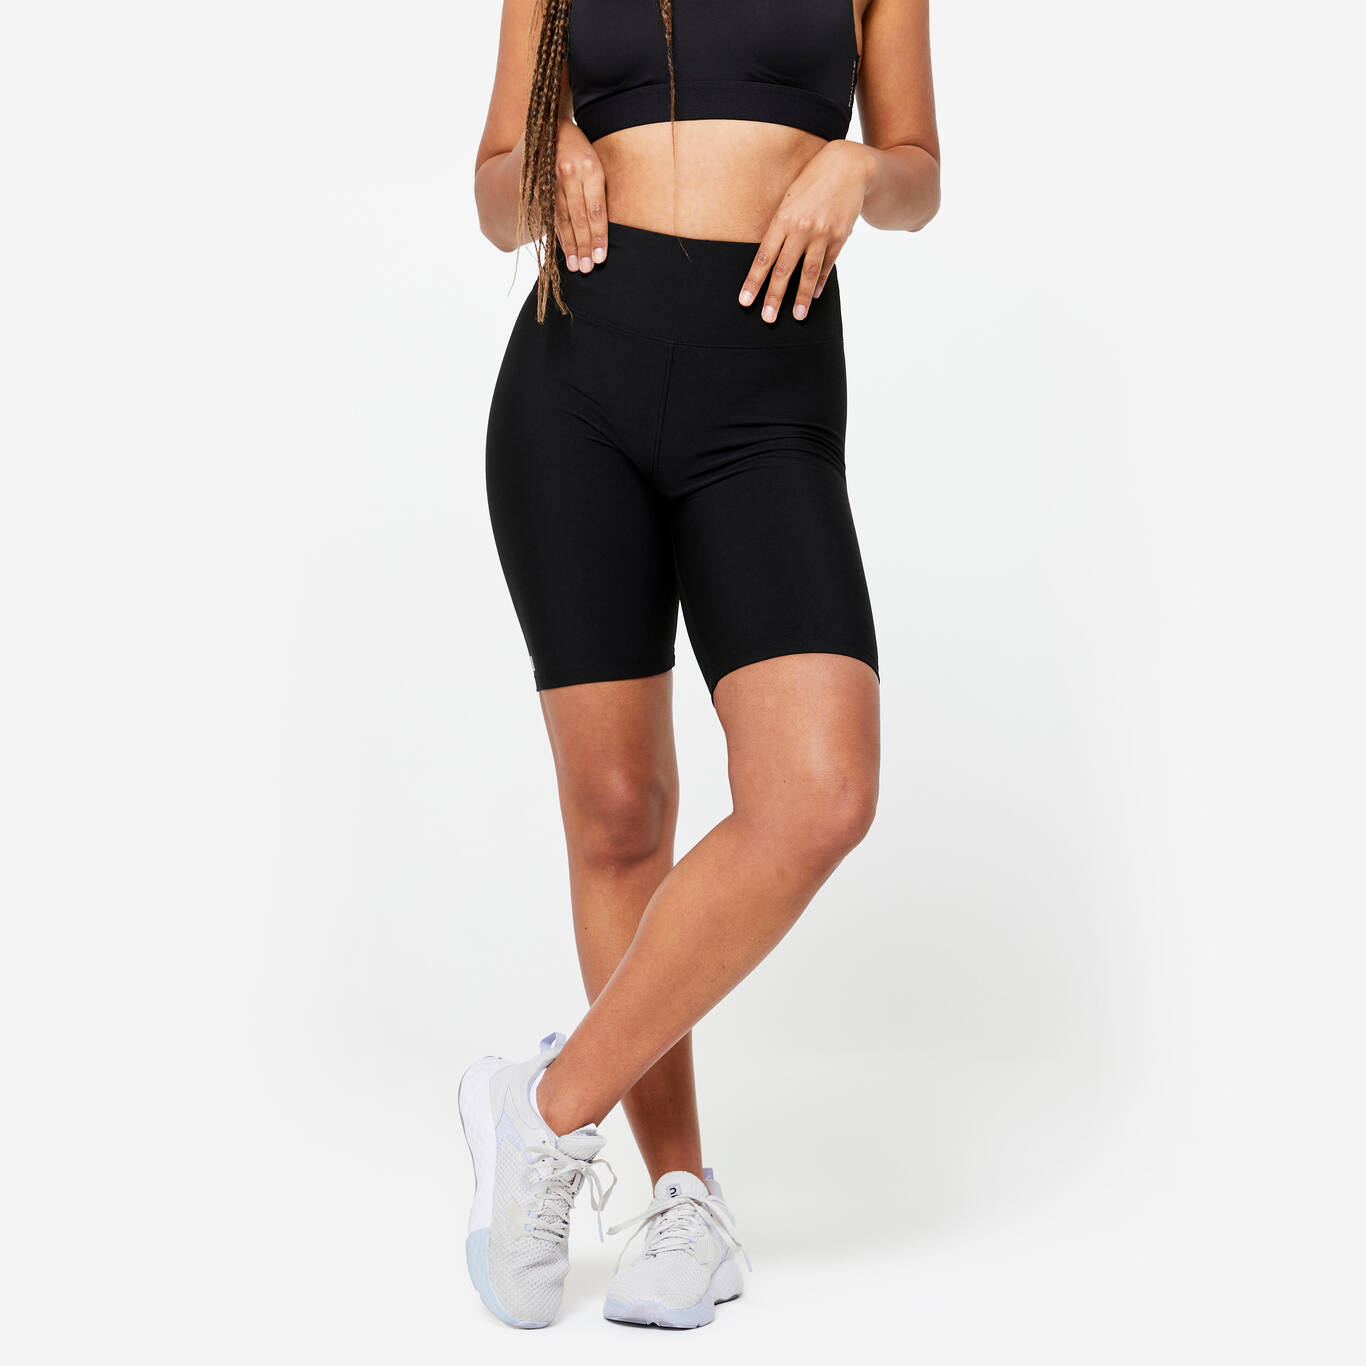 Women's High-Waisted Fitness Cardio Cycling Shorts - Black